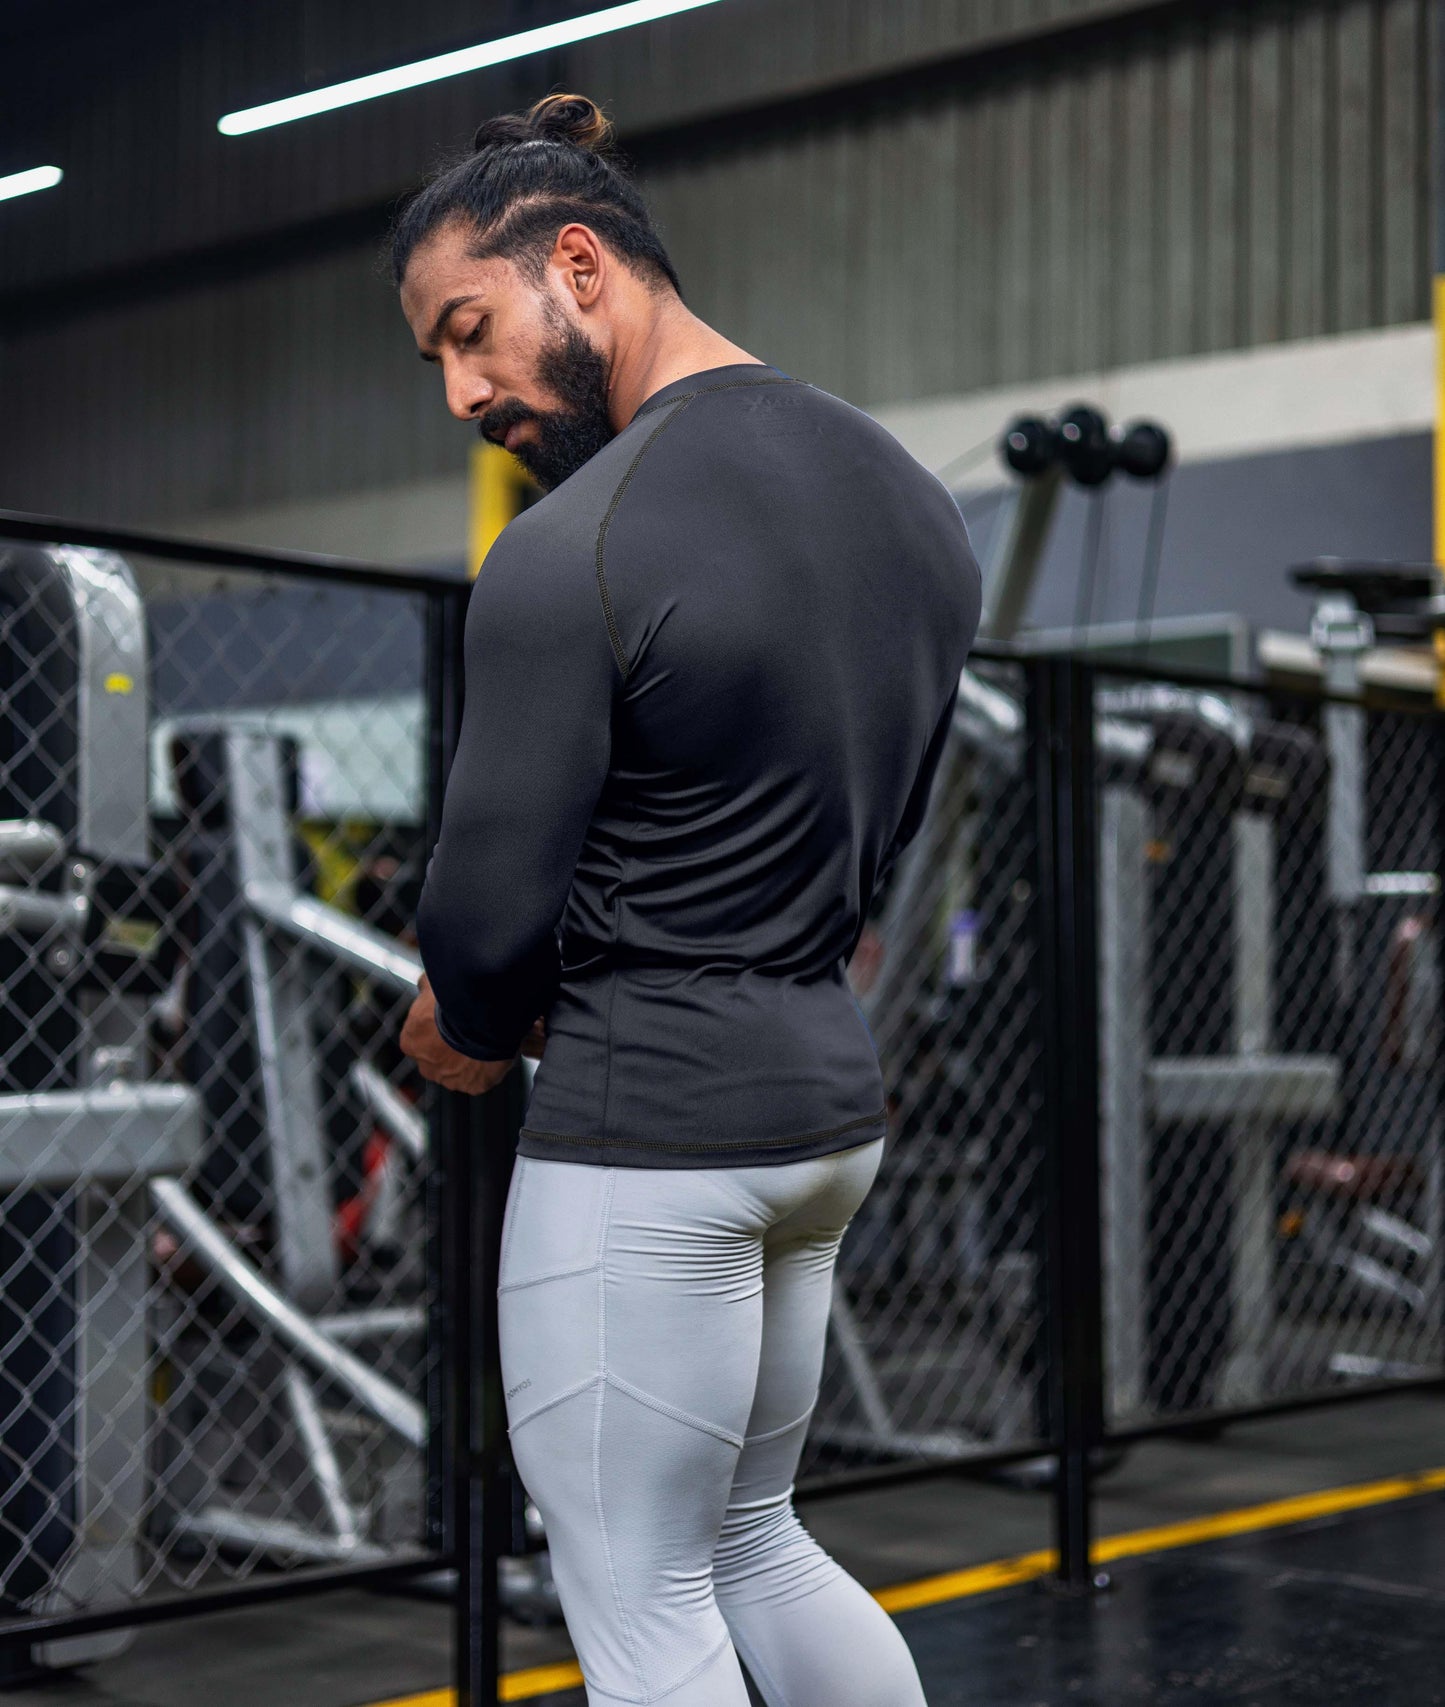 Compression GymX Full Sleeve Tee: Carbon Grey